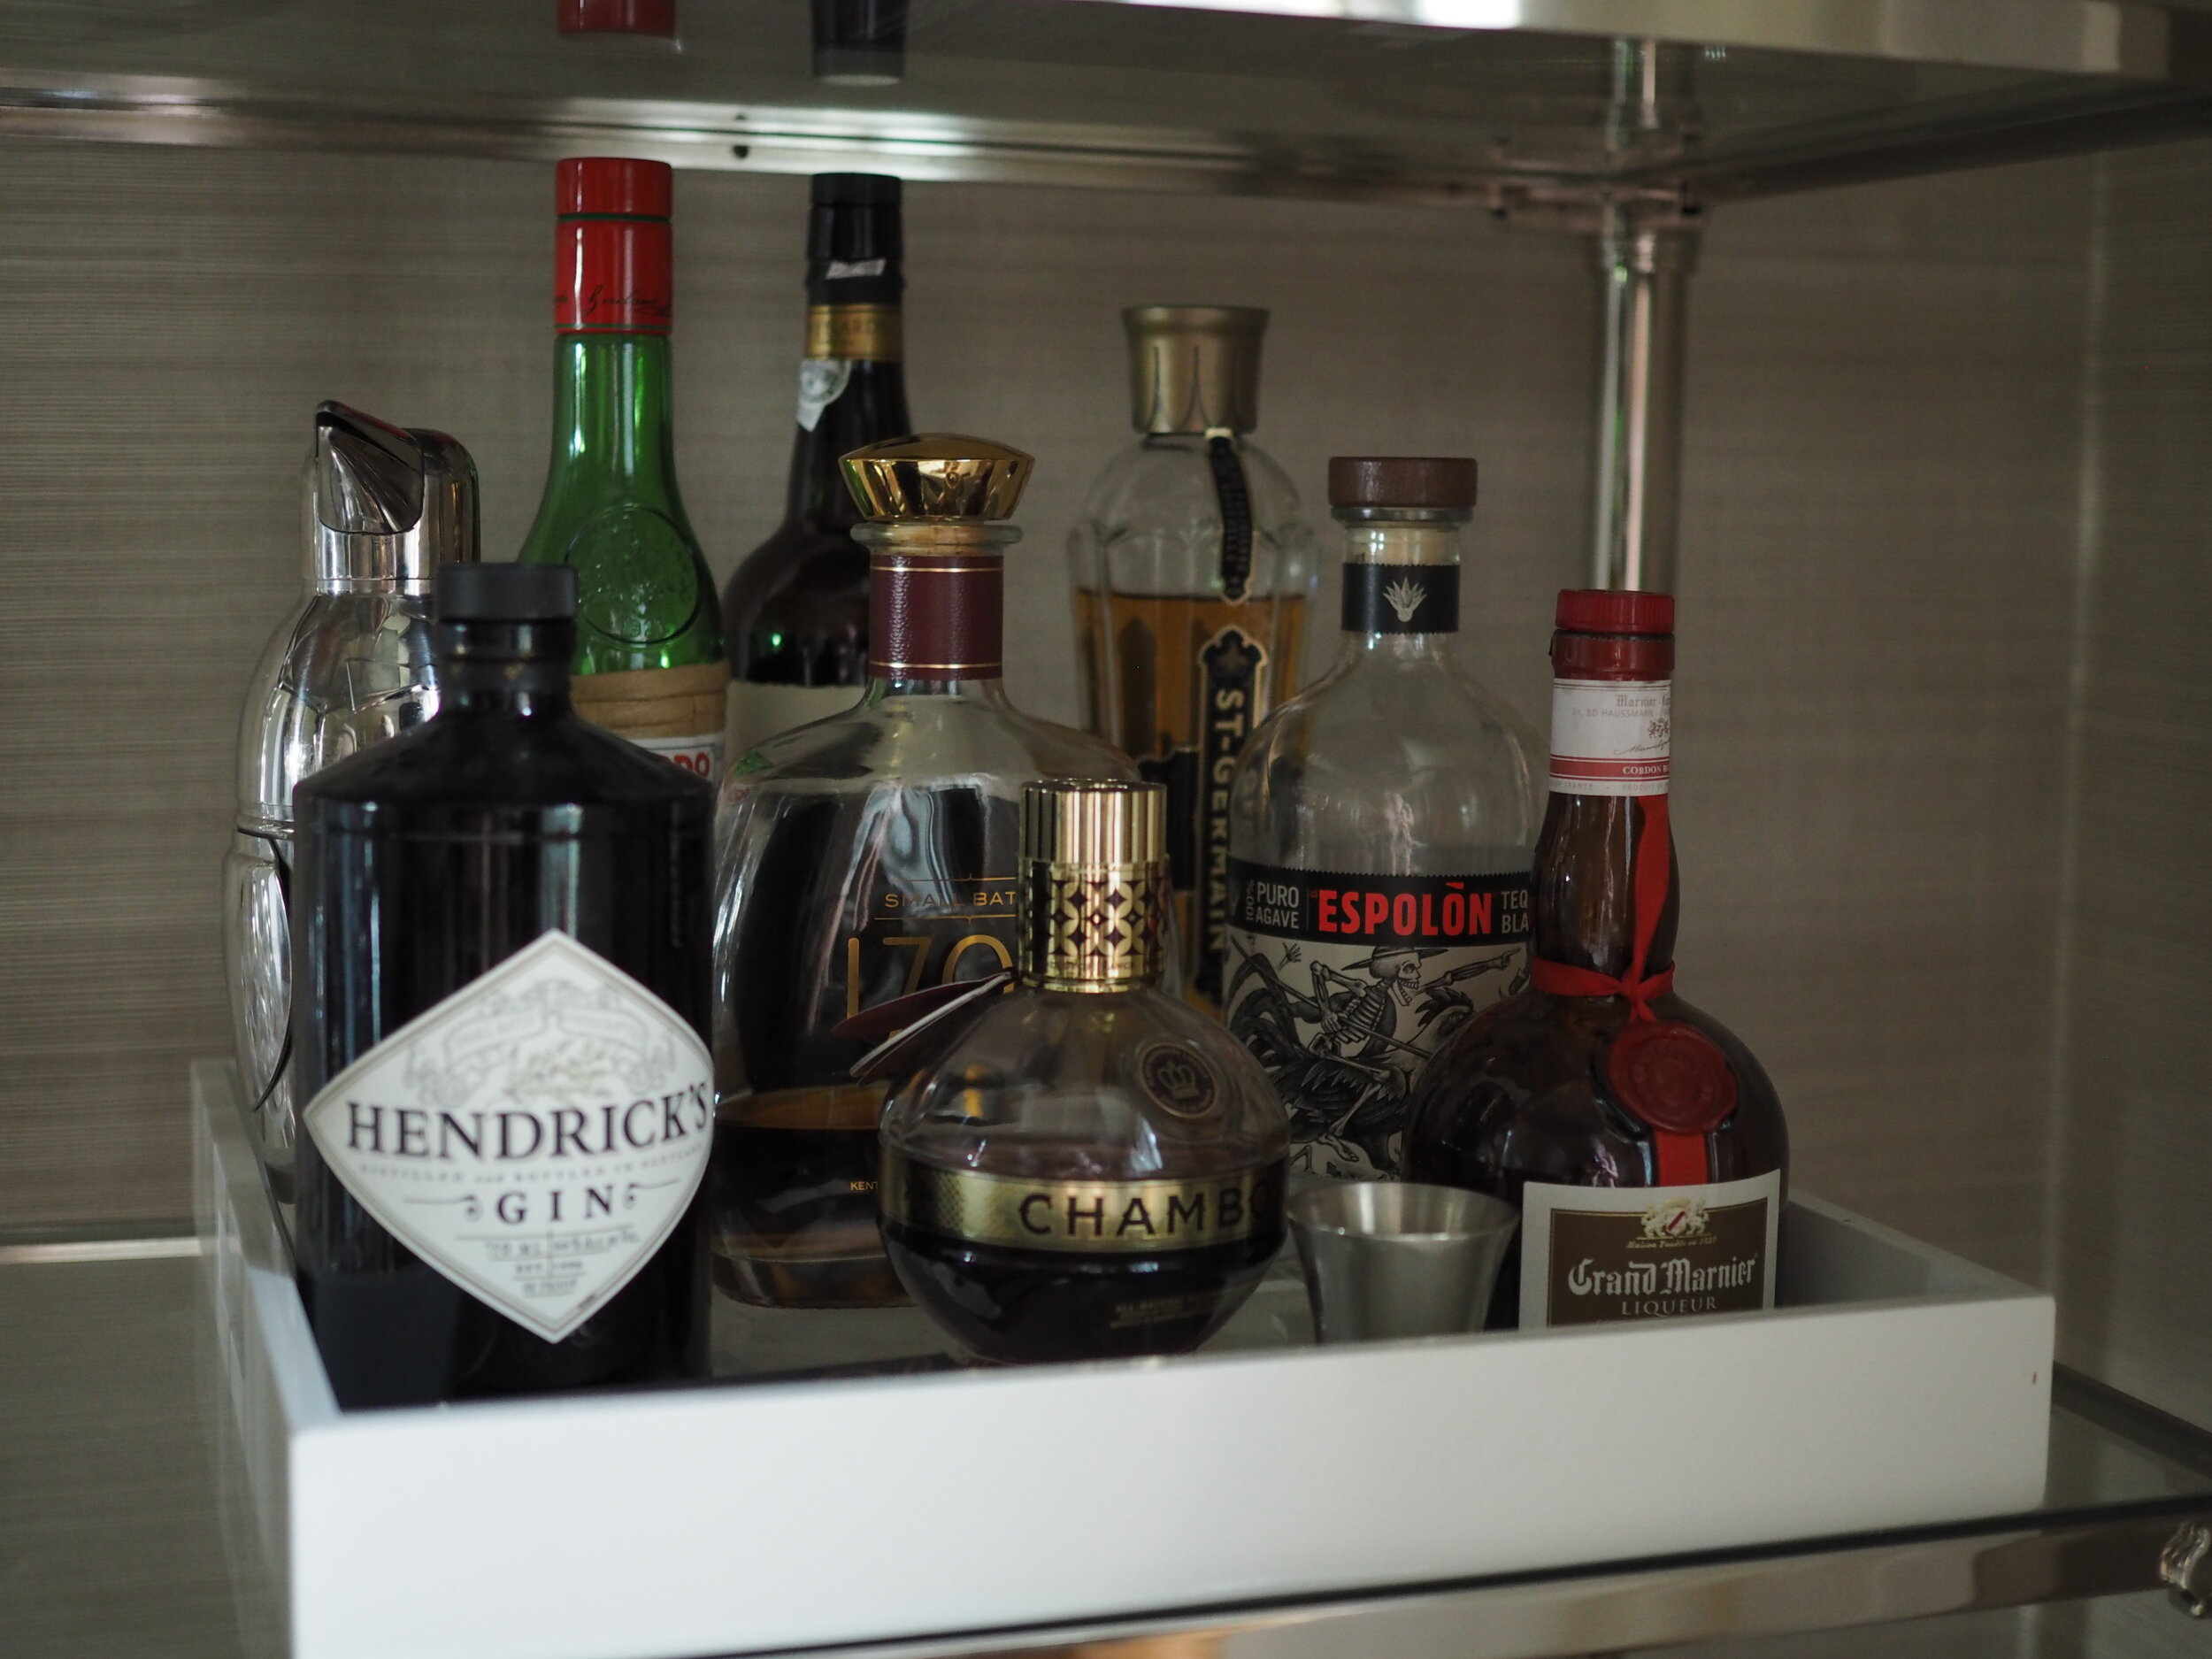 The bar essentials; we also keep Tito’s vodka and a couple of other items on hand, but those larger bottles are stored in a cabinet in the kitchen